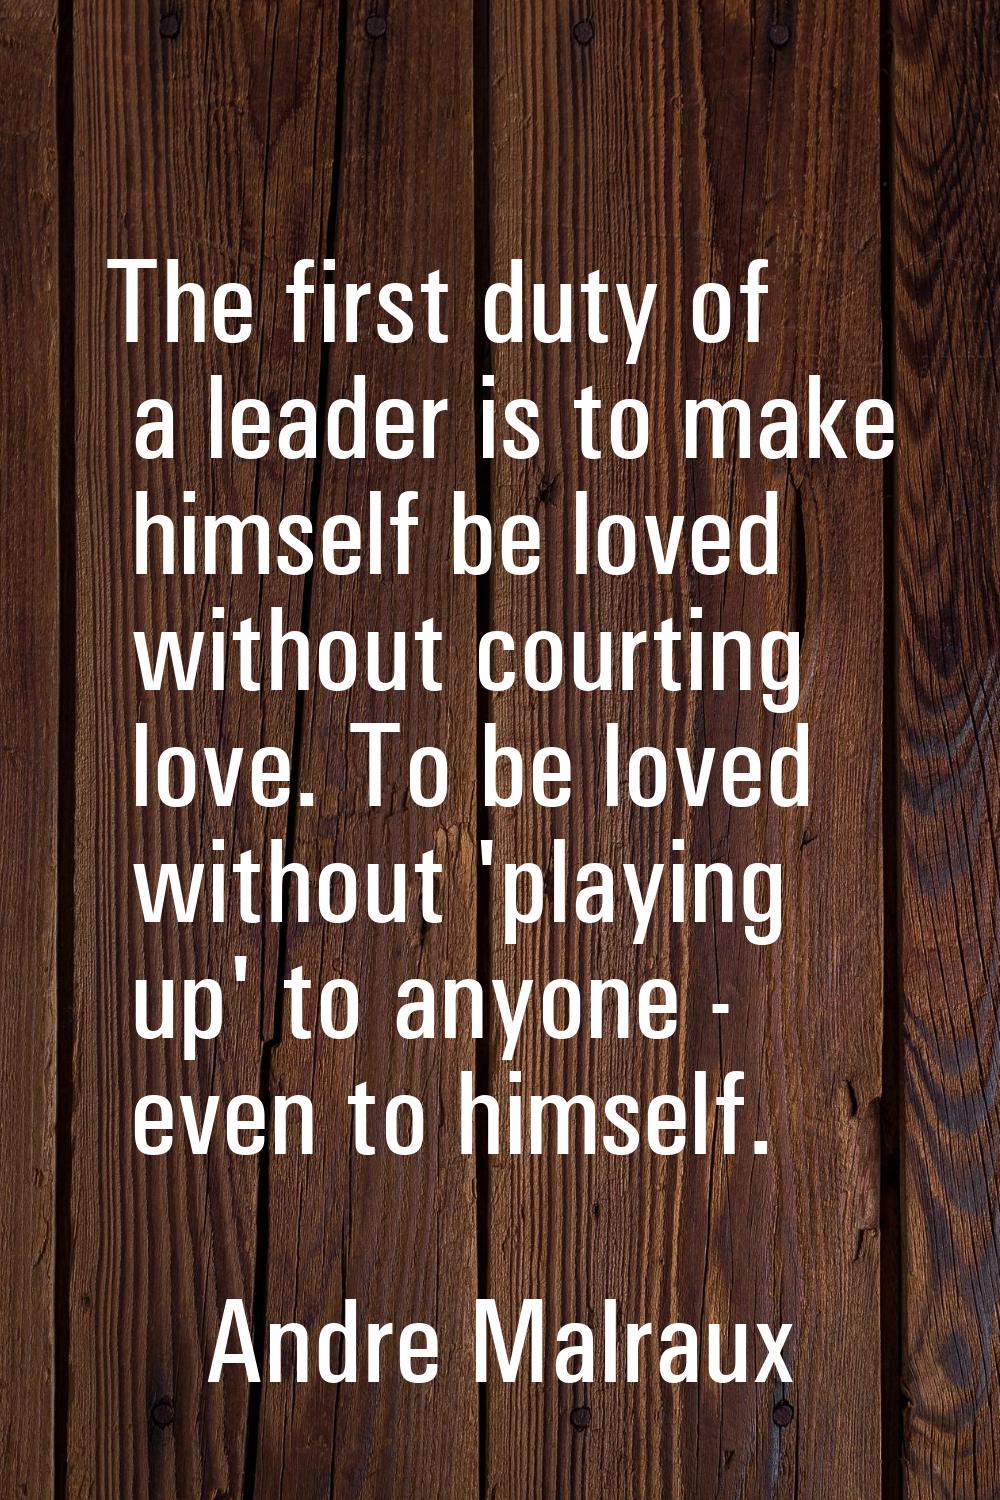 The first duty of a leader is to make himself be loved without courting love. To be loved without '